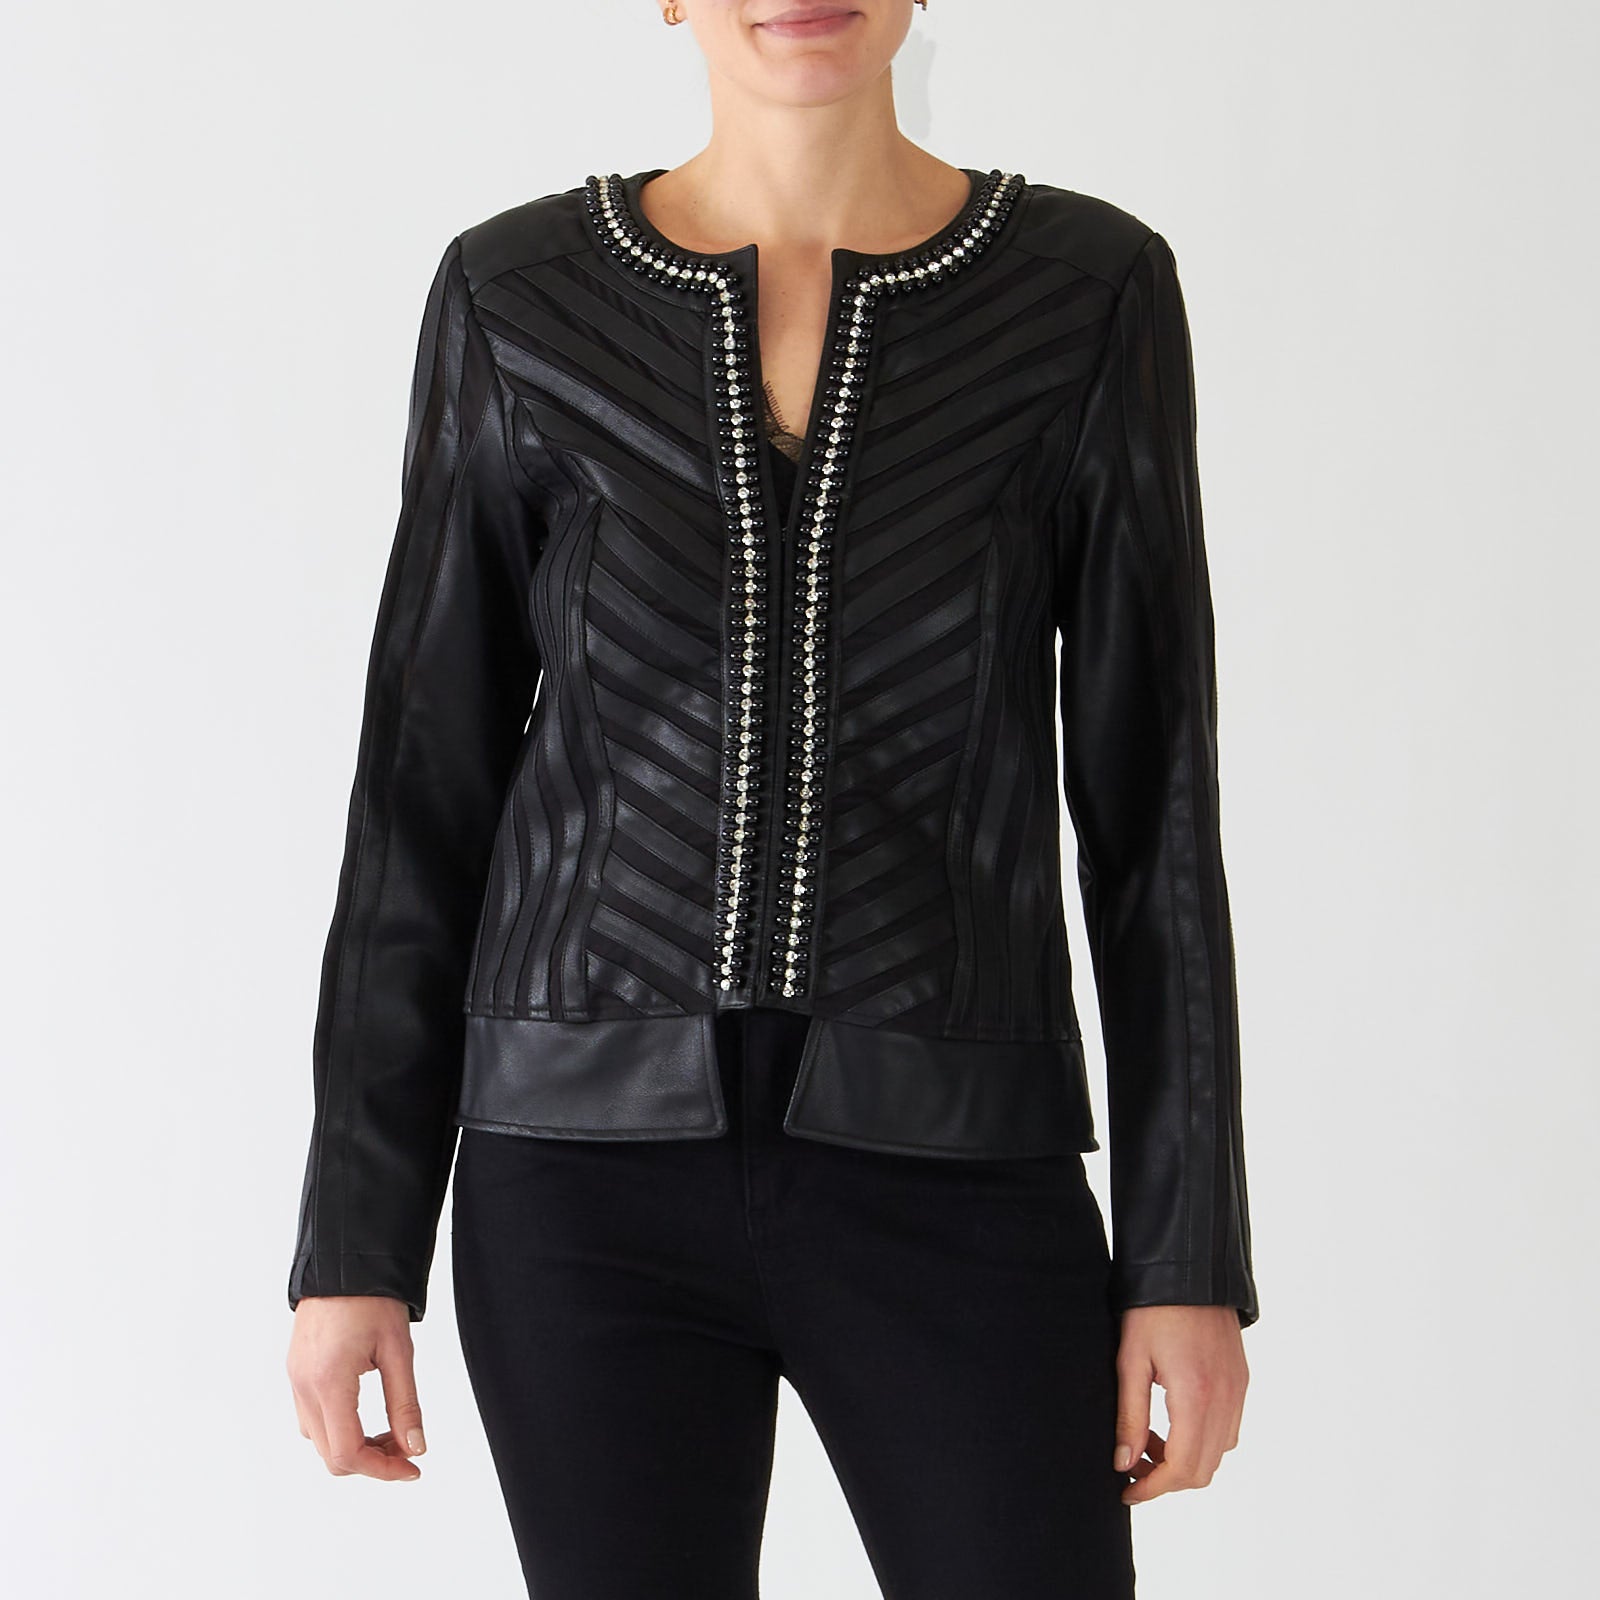 Black Faux Leather Jacket With Beaded Crystal Trim